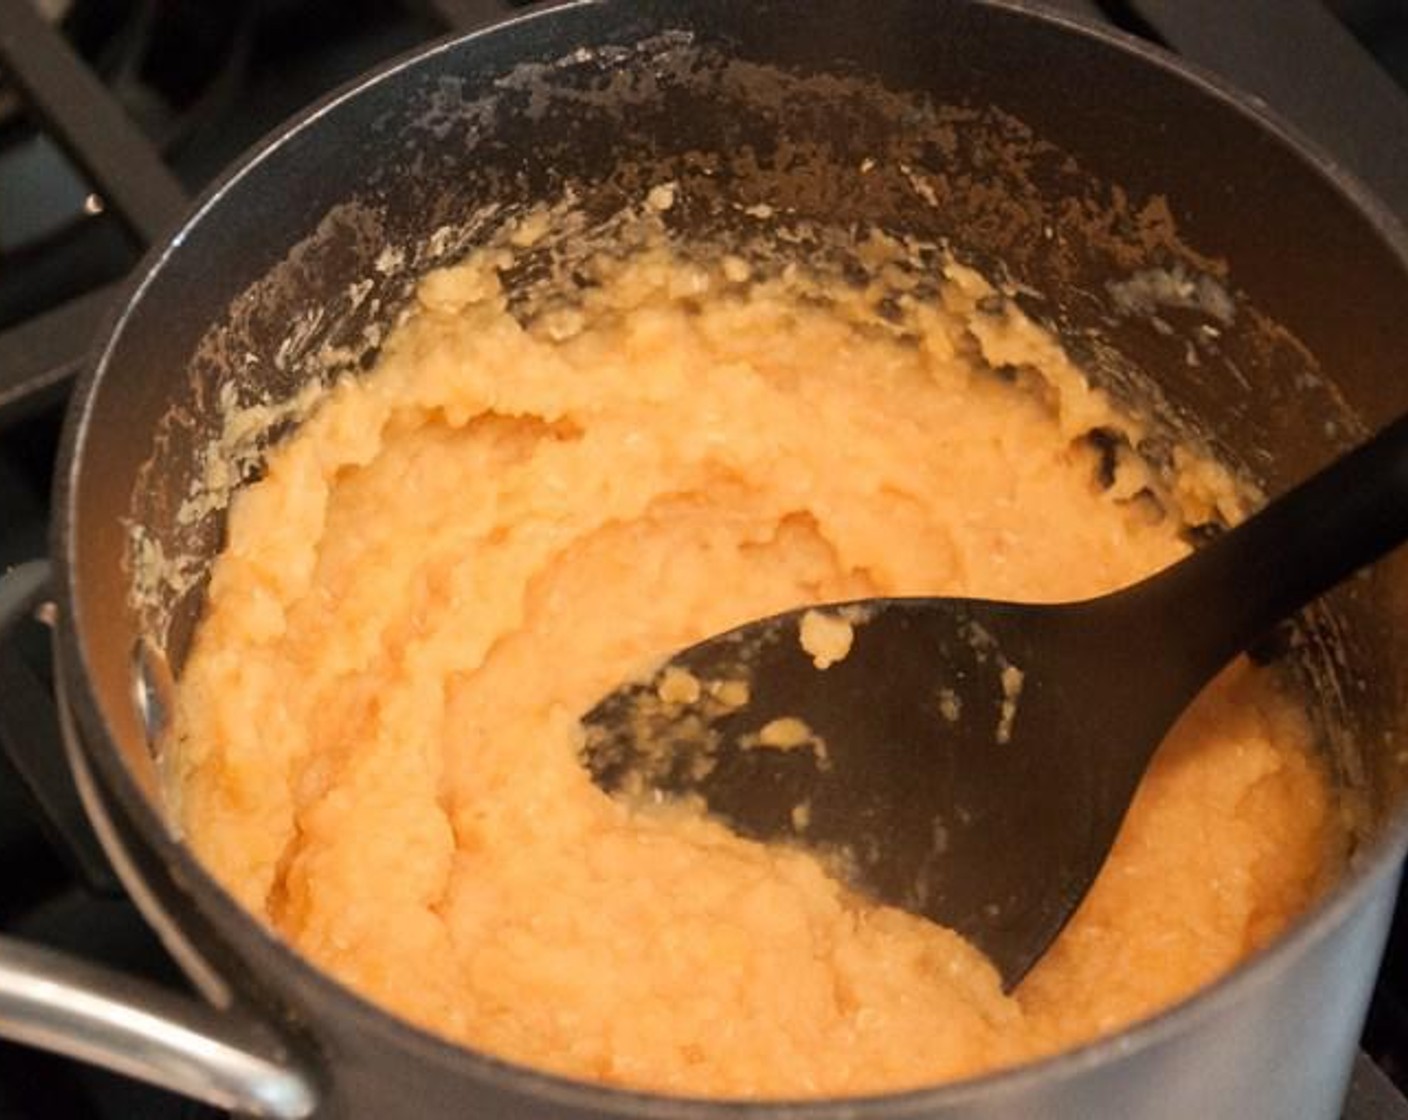 step 1 Put the Red Lentils (1 cup) and water in a pot and bring to a boil. Reduce the heat to low and simmer until the lentils are softened, about 15 minutes.